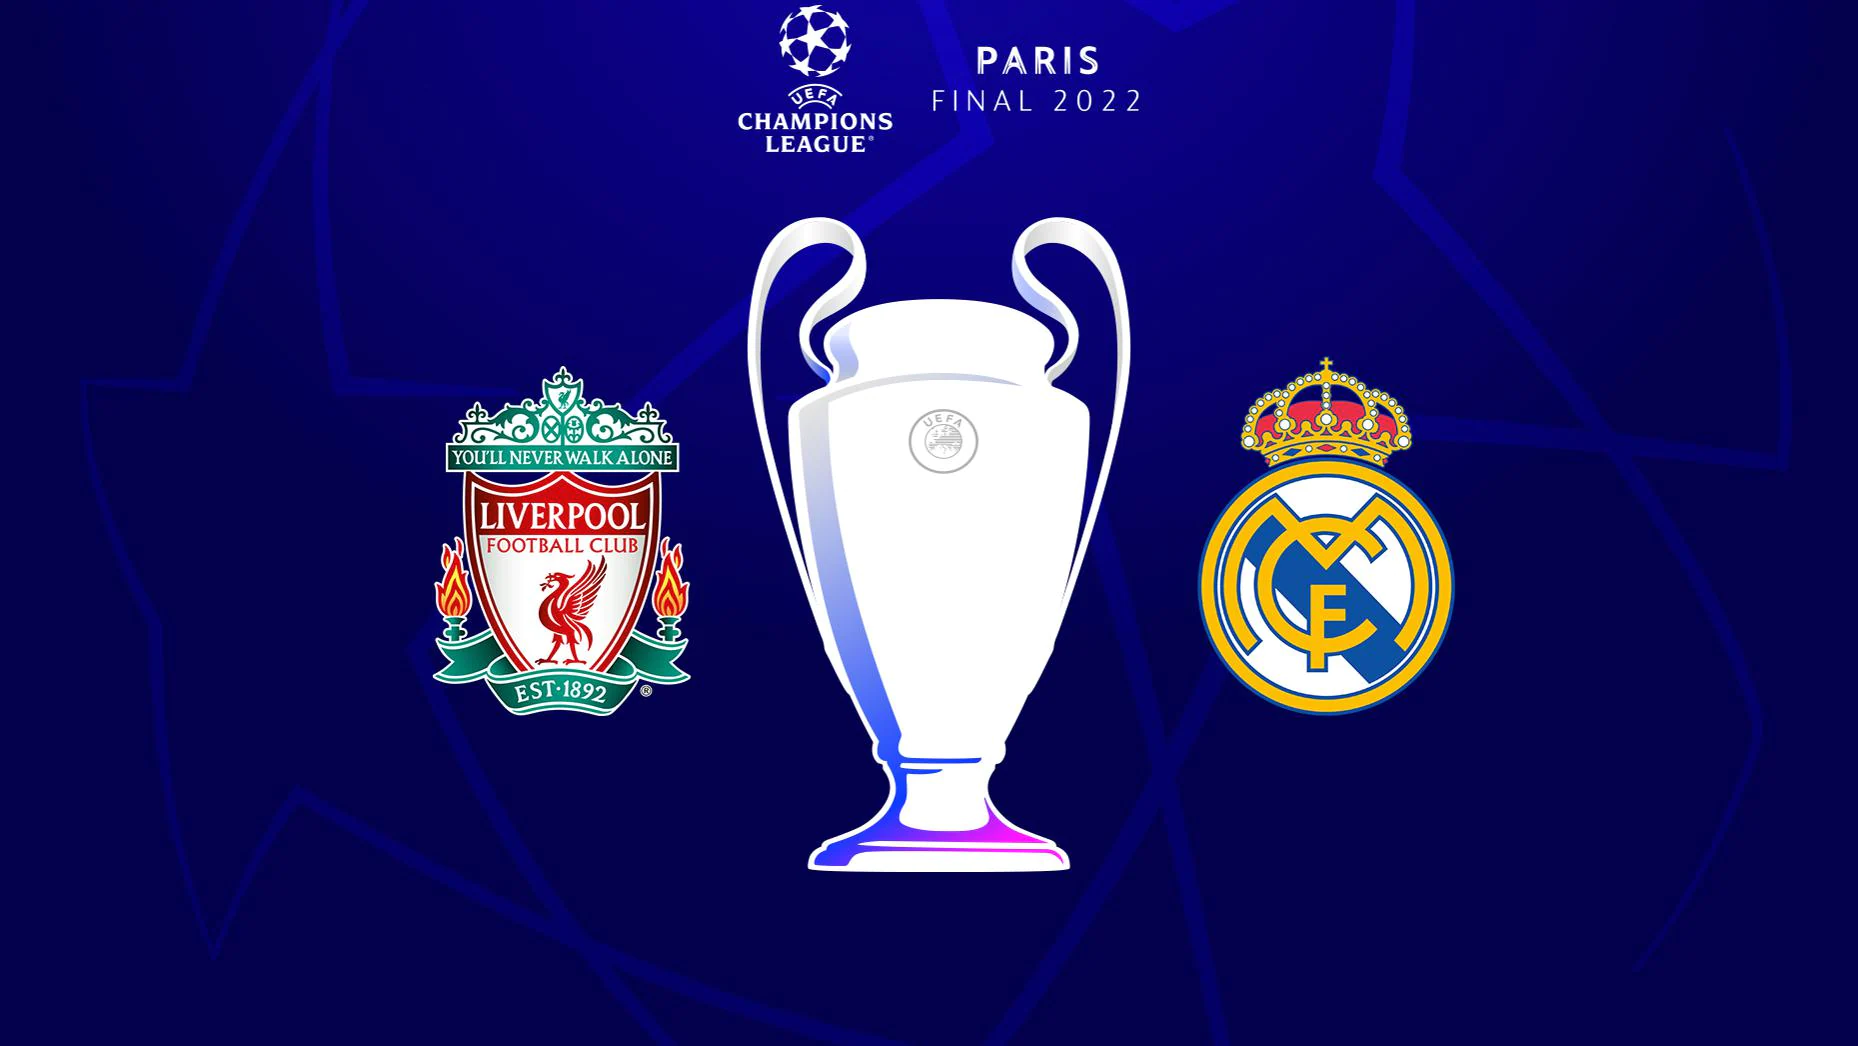 Champions League final: Liverpool vs Real Madrid Match Preview, Where to Watch, Odds and Lineups | May 28